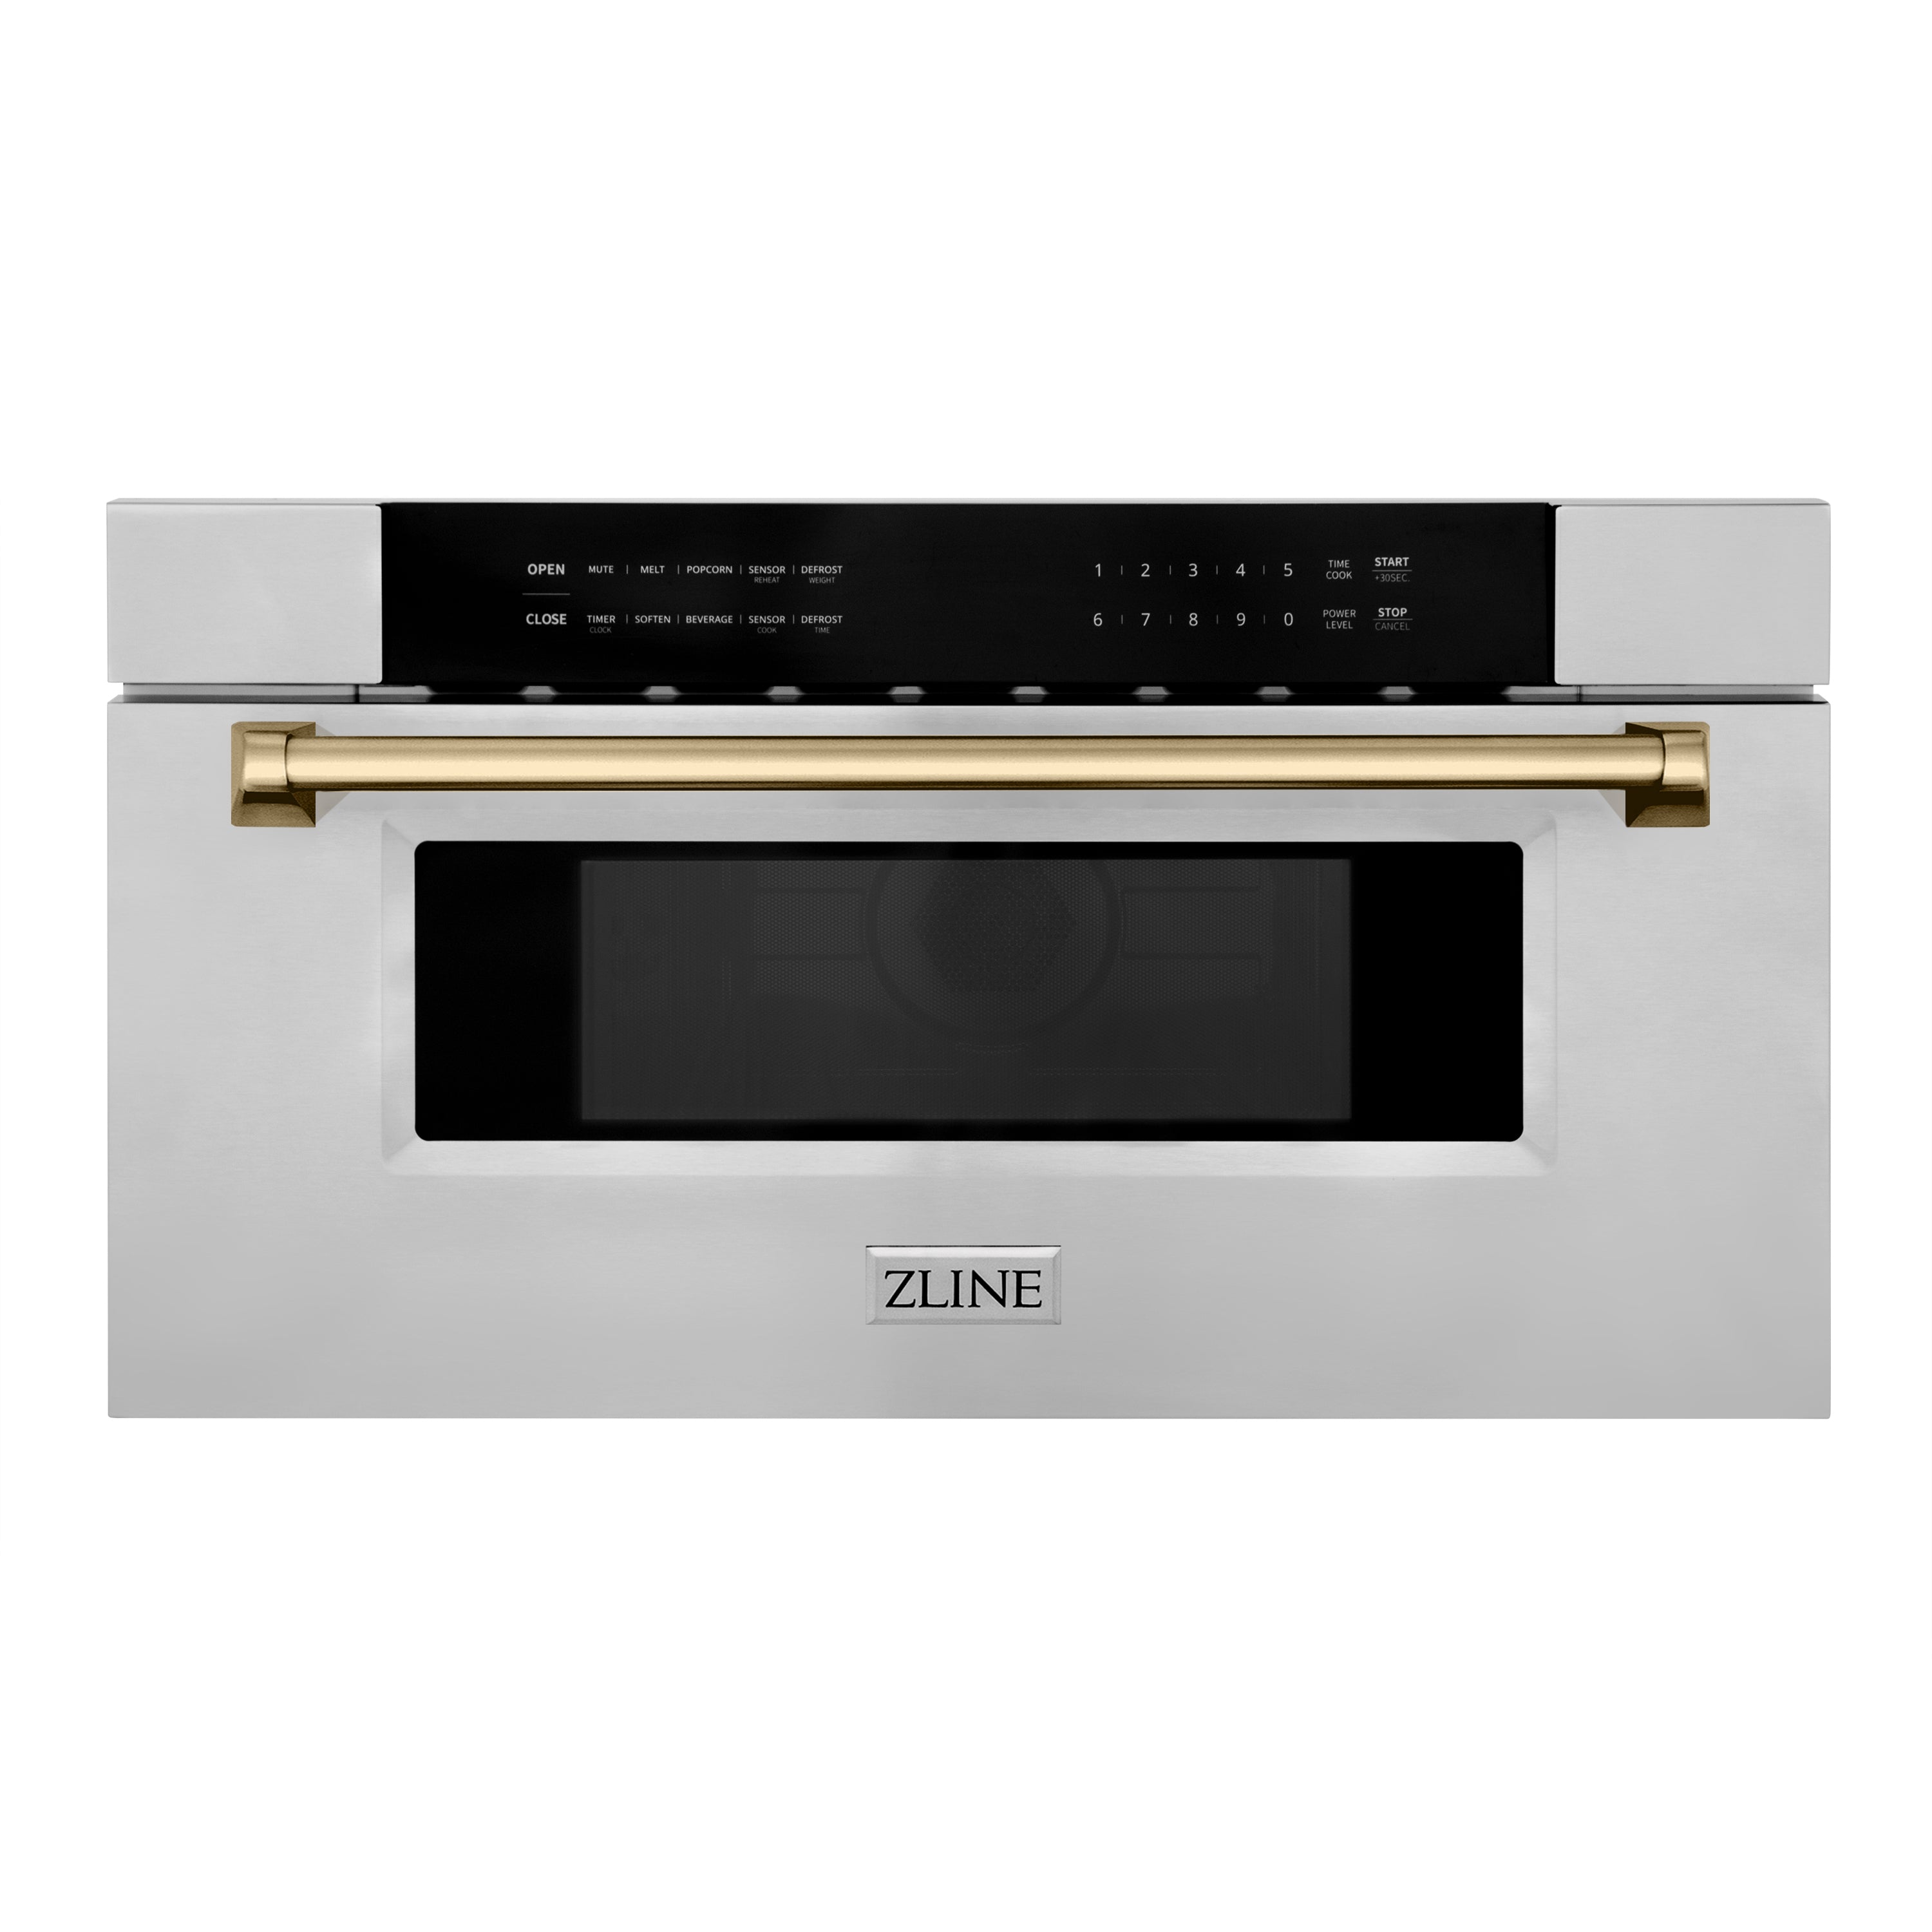 ZLINE Autograph Edition 30 in. 1.2 cu. ft. Built-In Microwave Drawer in Stainless Steel with Champagne Bronze Accents (MWDZ-30-CB) Front View